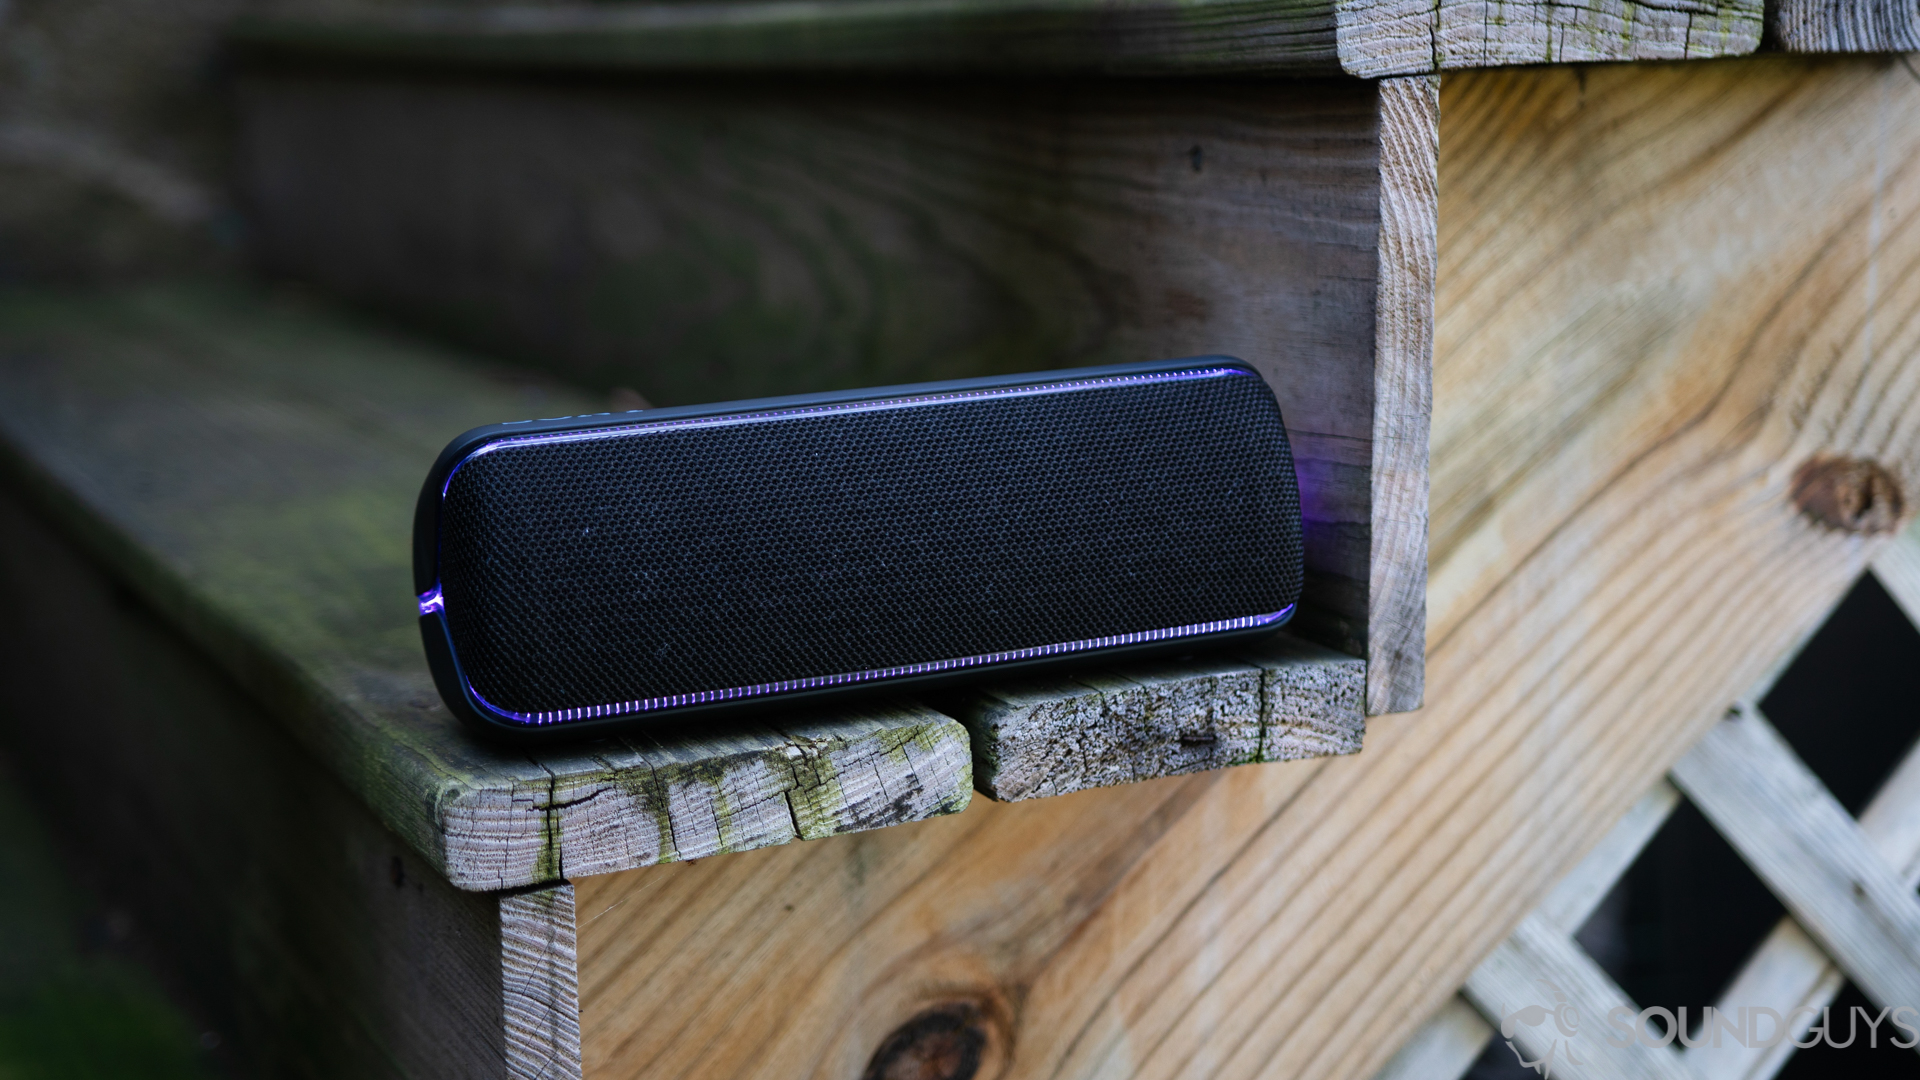 Sony SRS-XB32 review: BT speaker packed with features - SoundGuys